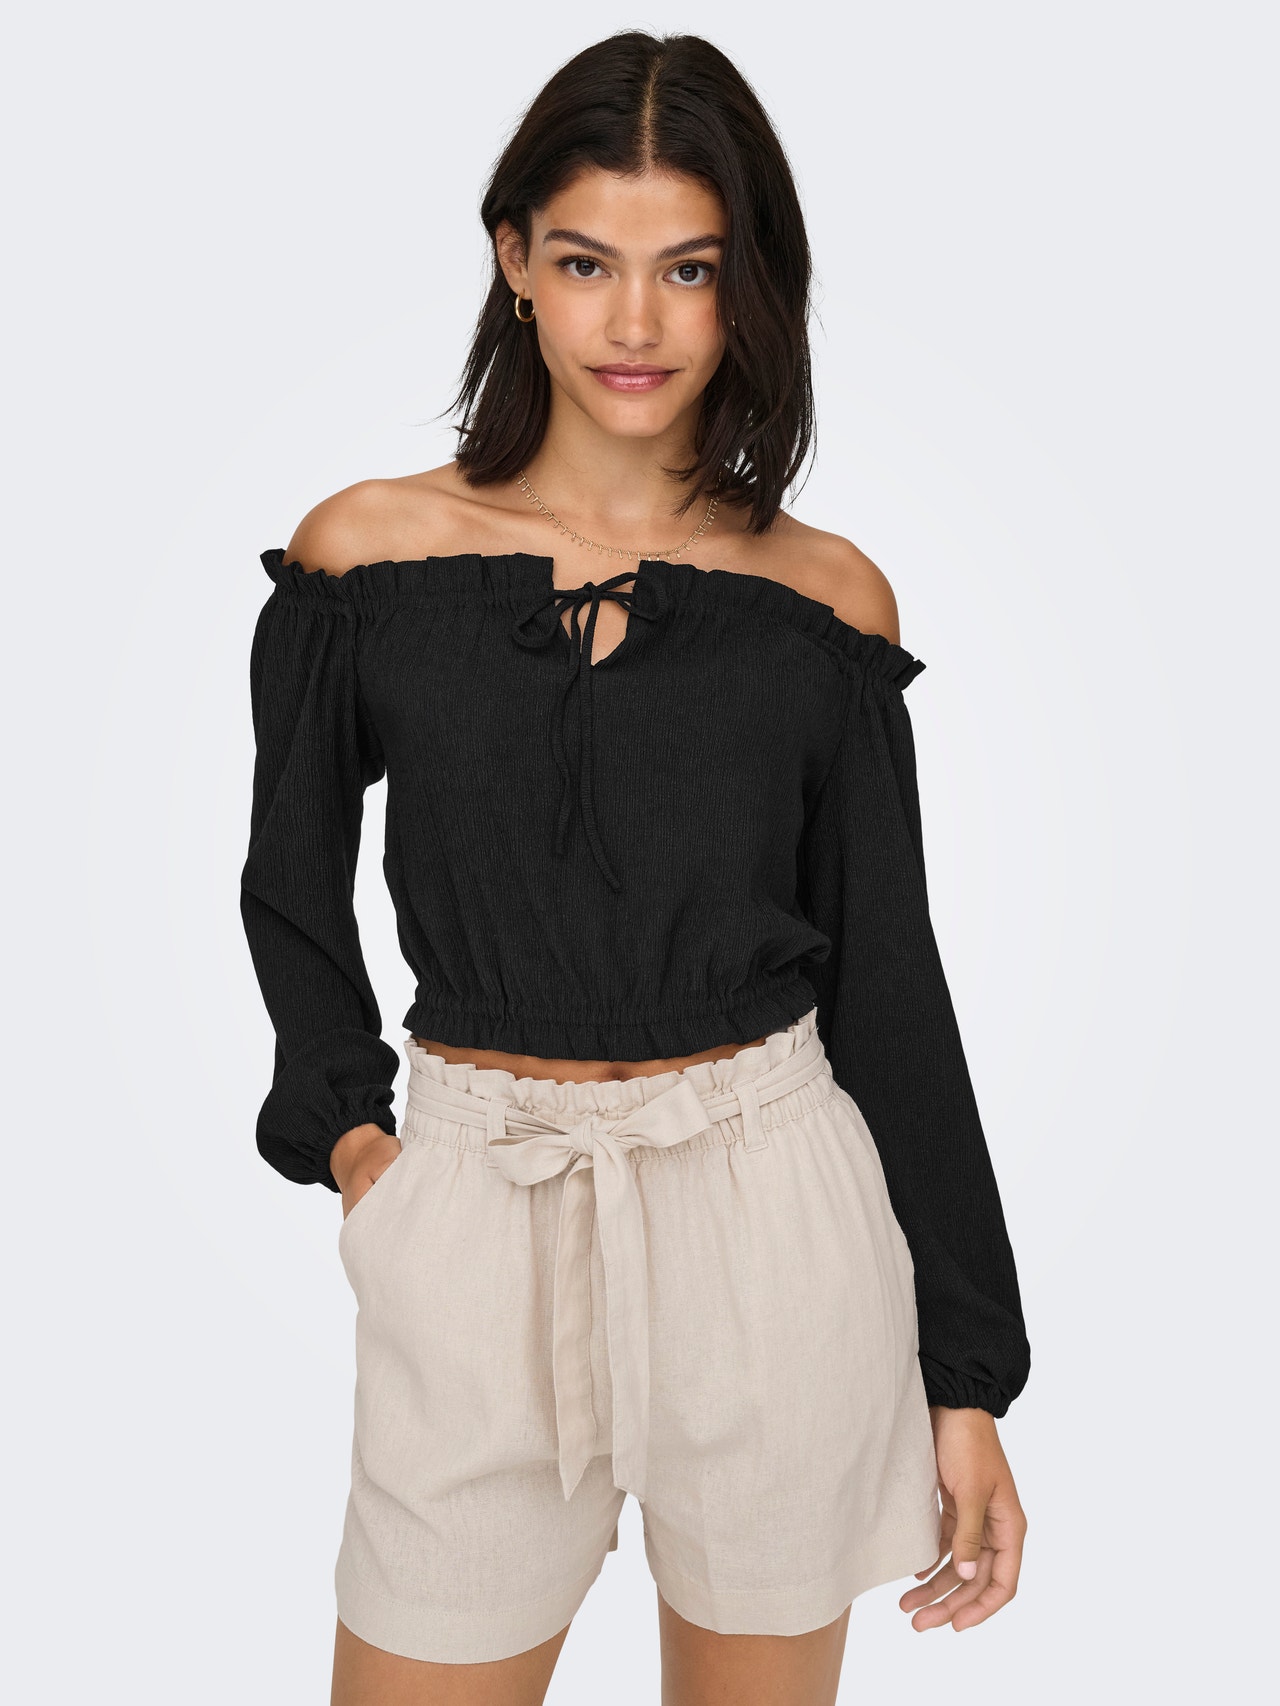 ONLY O-hals cropped top  -Black - 15290247